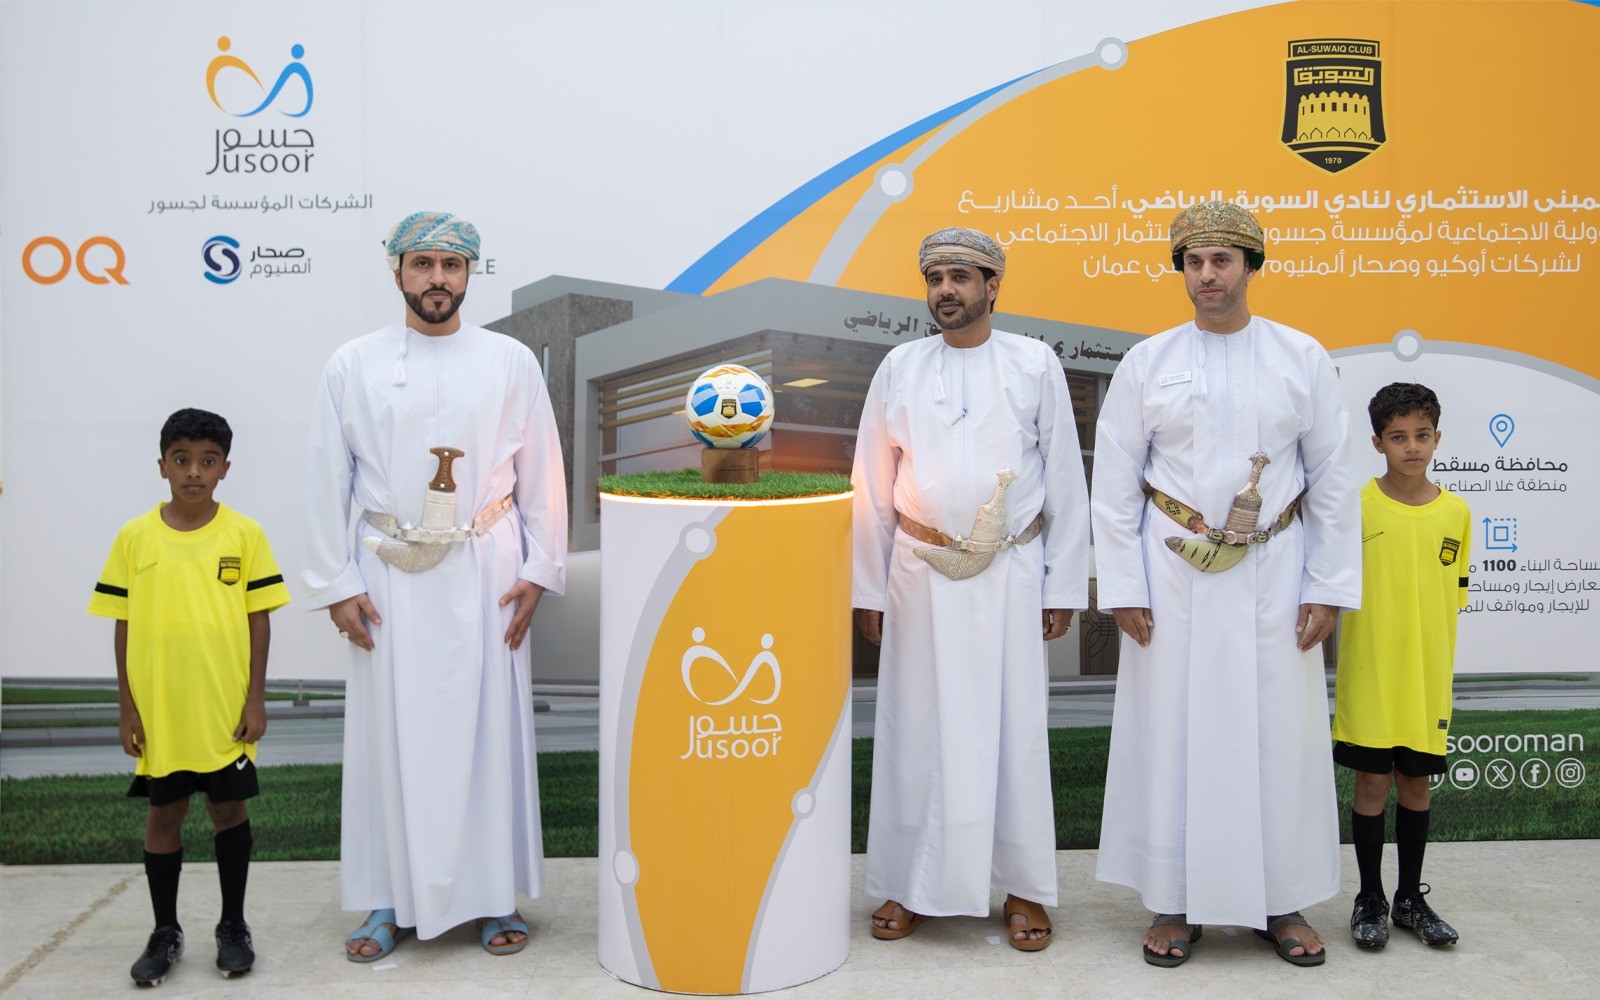 Jusoor celebrates the laying of the cornerstone for the Investment Building Project of Al Suwaiq Sport Club